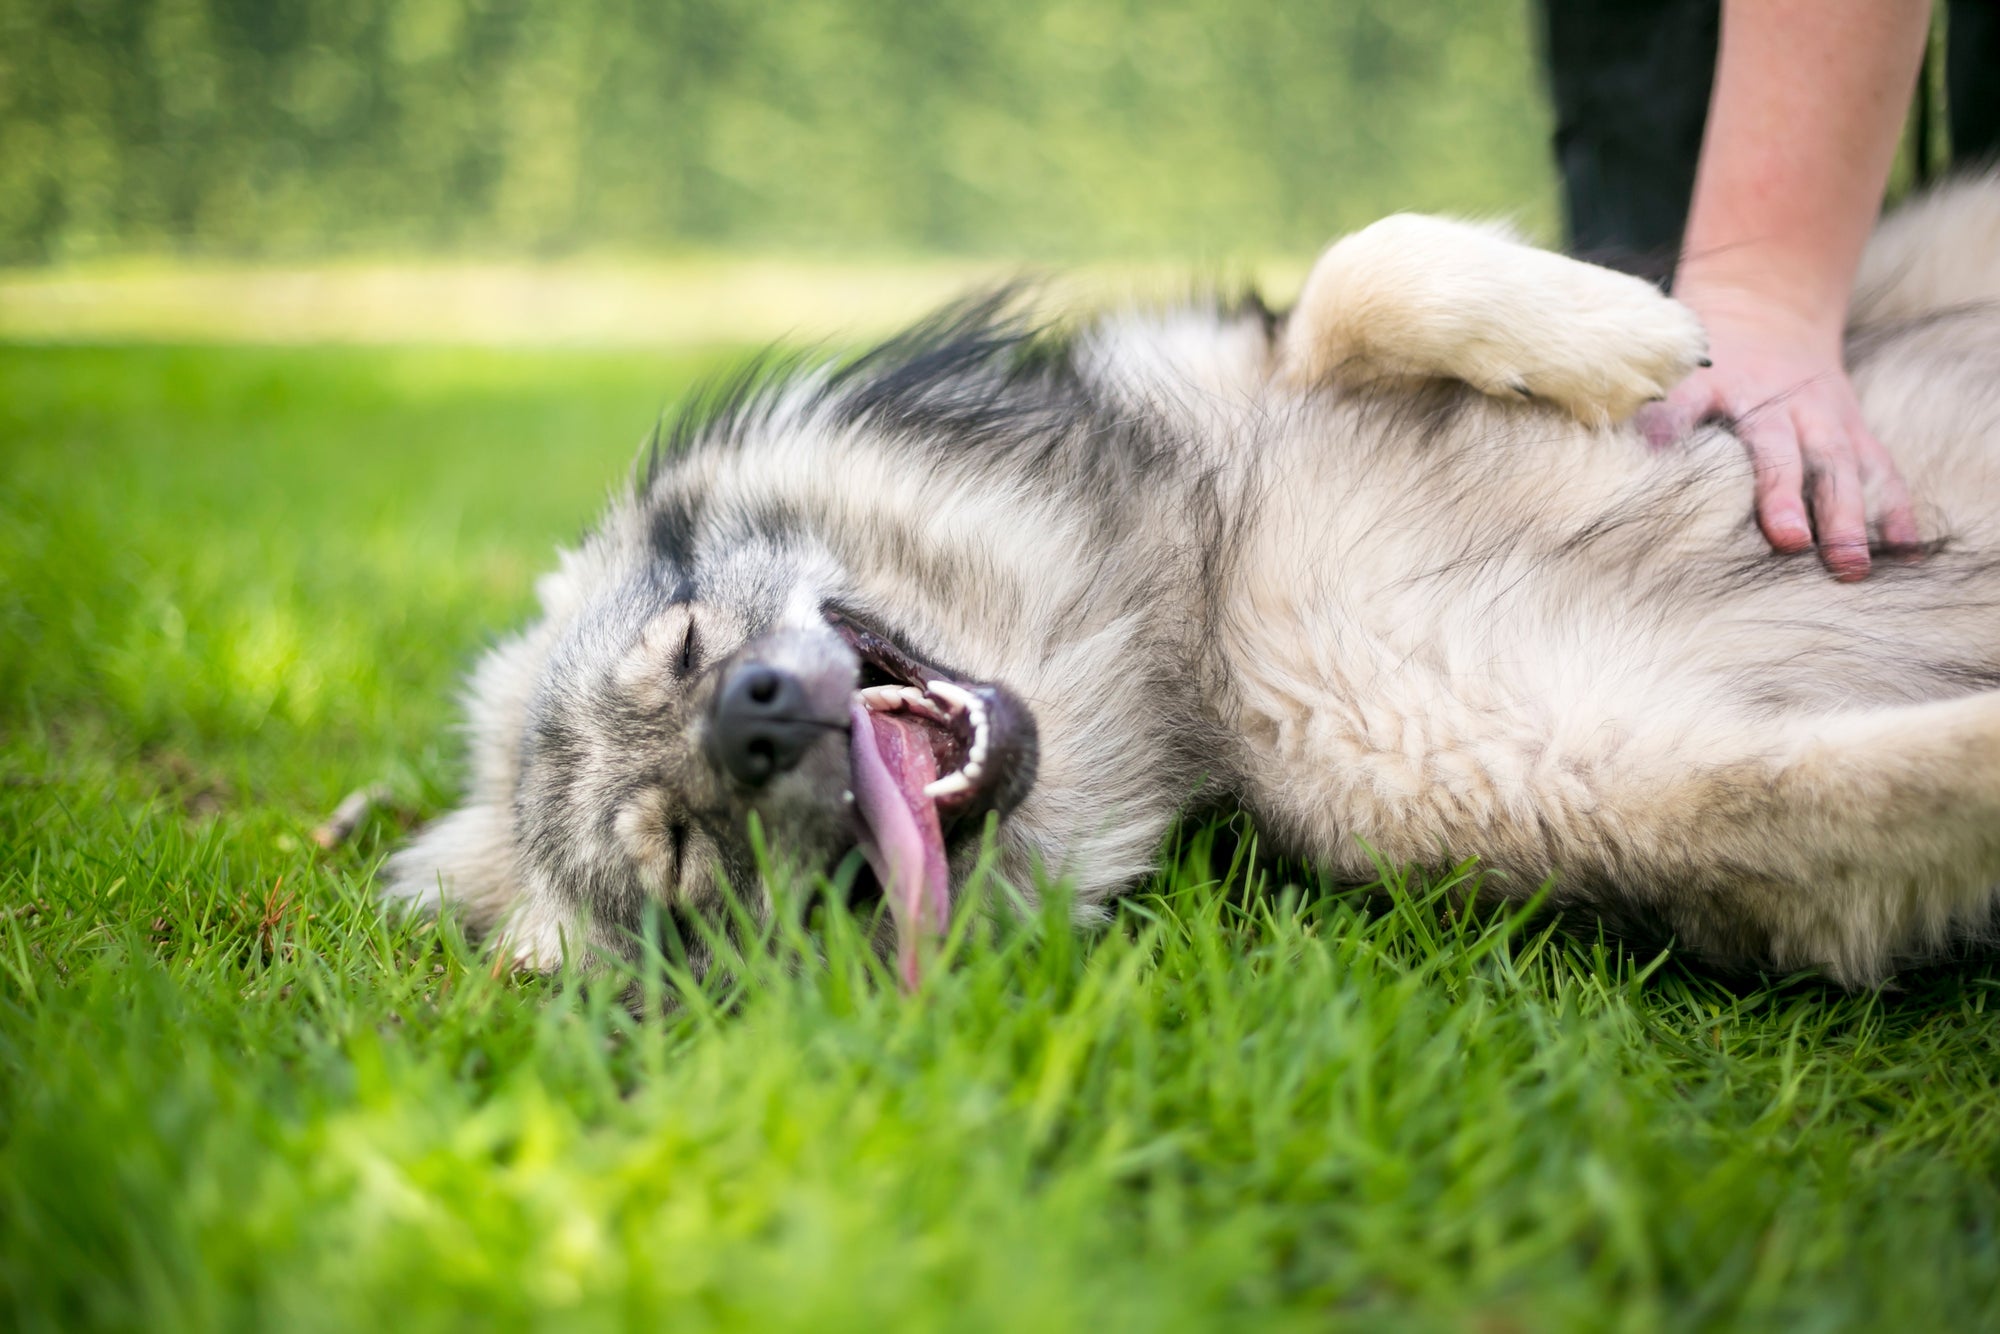 A dog lying on its back in the grass, close up of a furry animal's nose and tongue.